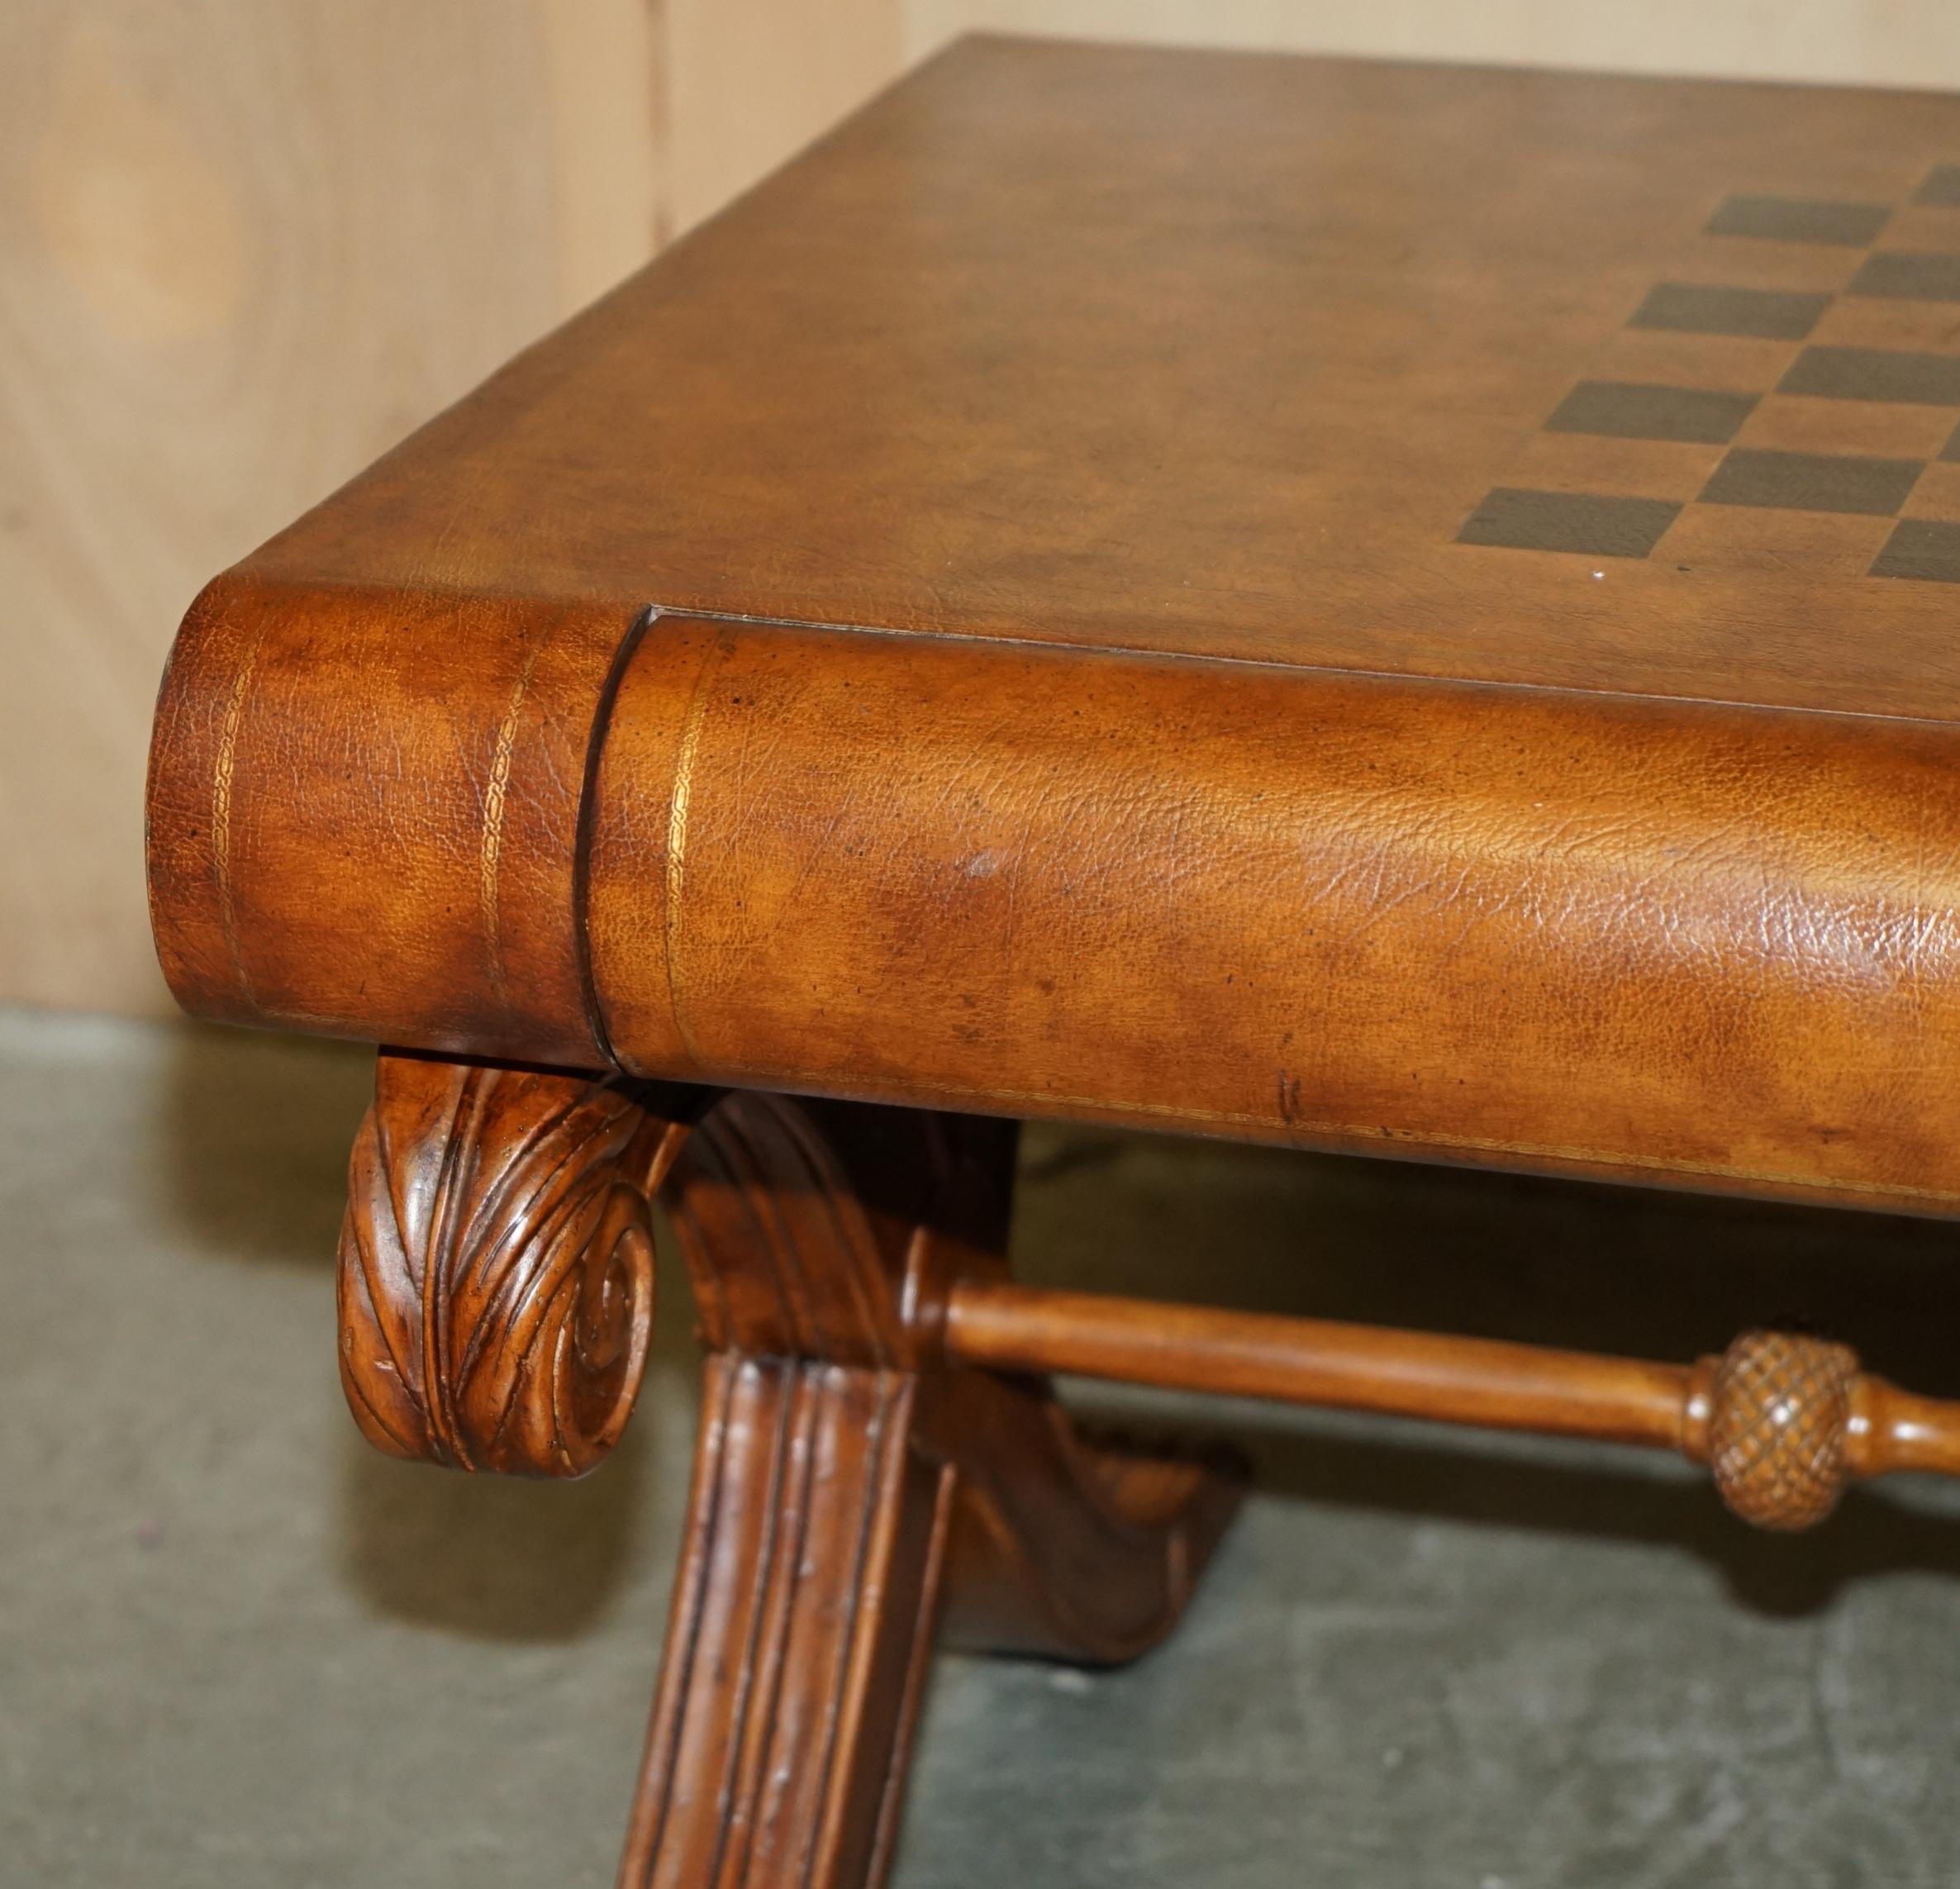 STUNNiNG HAND DYED BROWN LEATHER SCHOLARS BOOK CHESSBOARD CHESS COFFEE TABLE For Sale 1